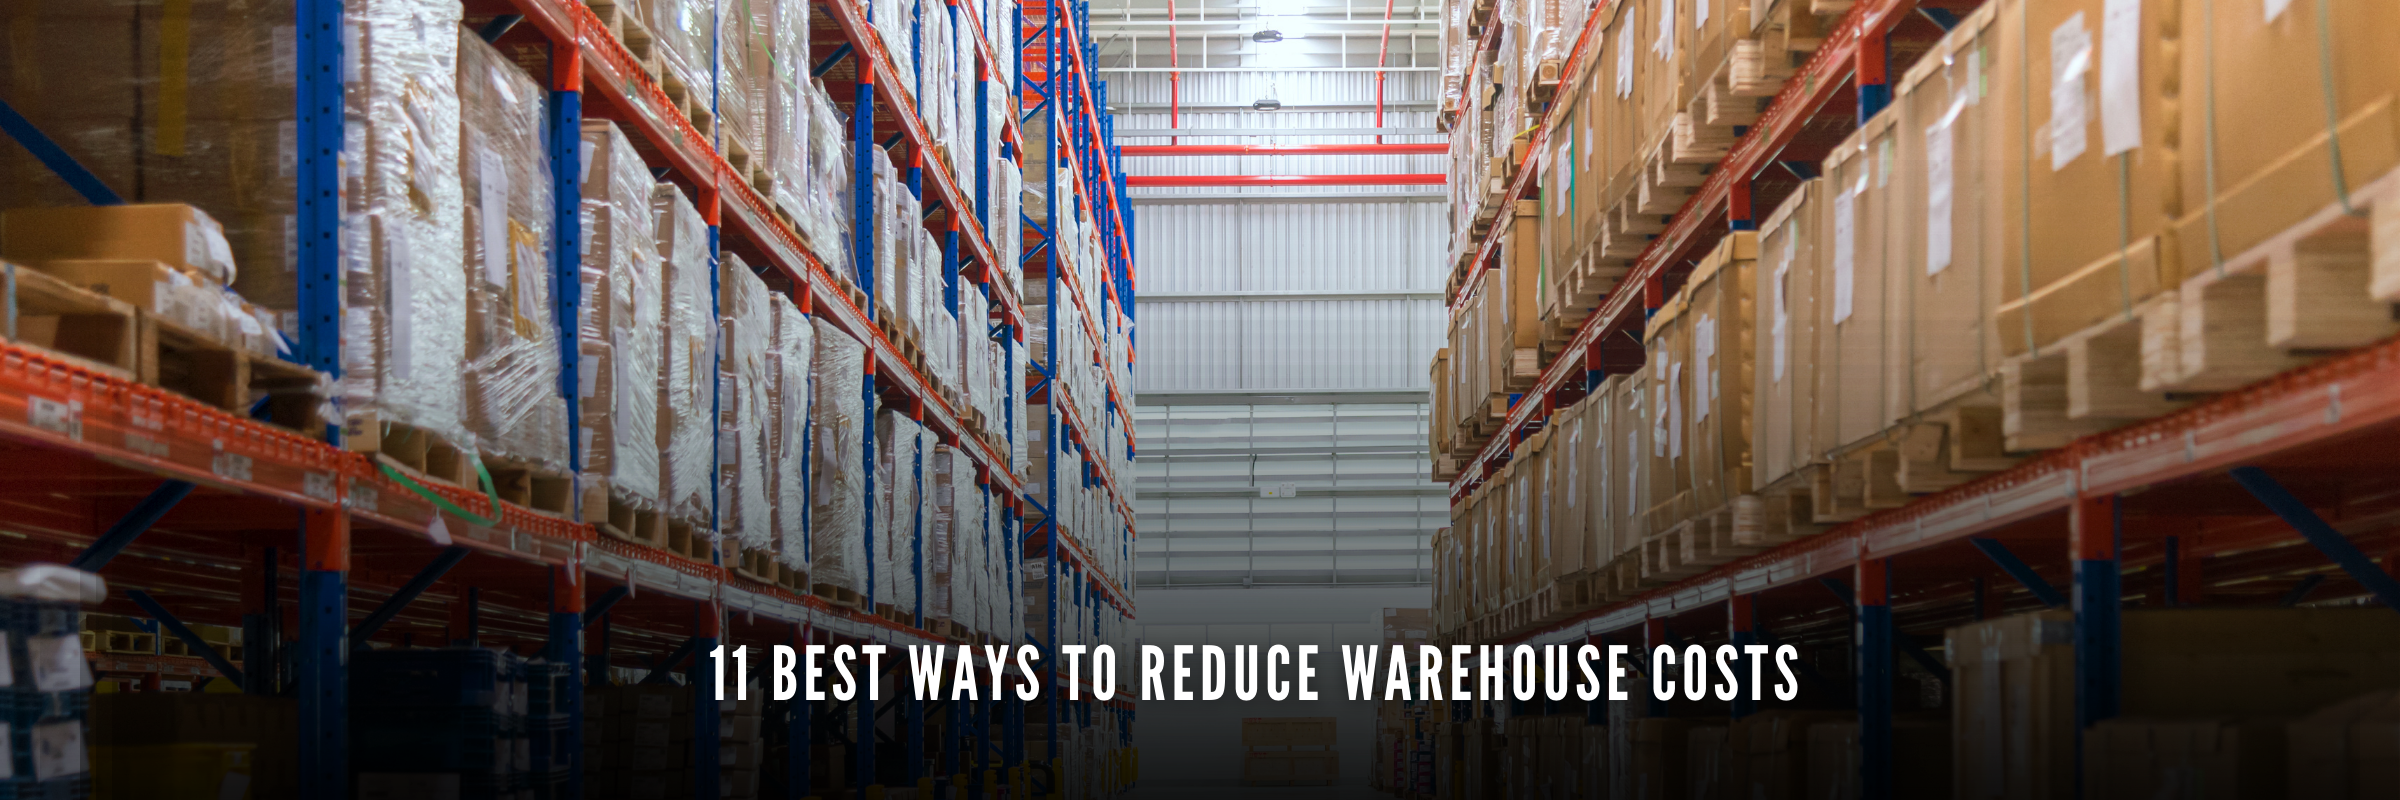 11 Best ways to Reduce Warehouse Costs